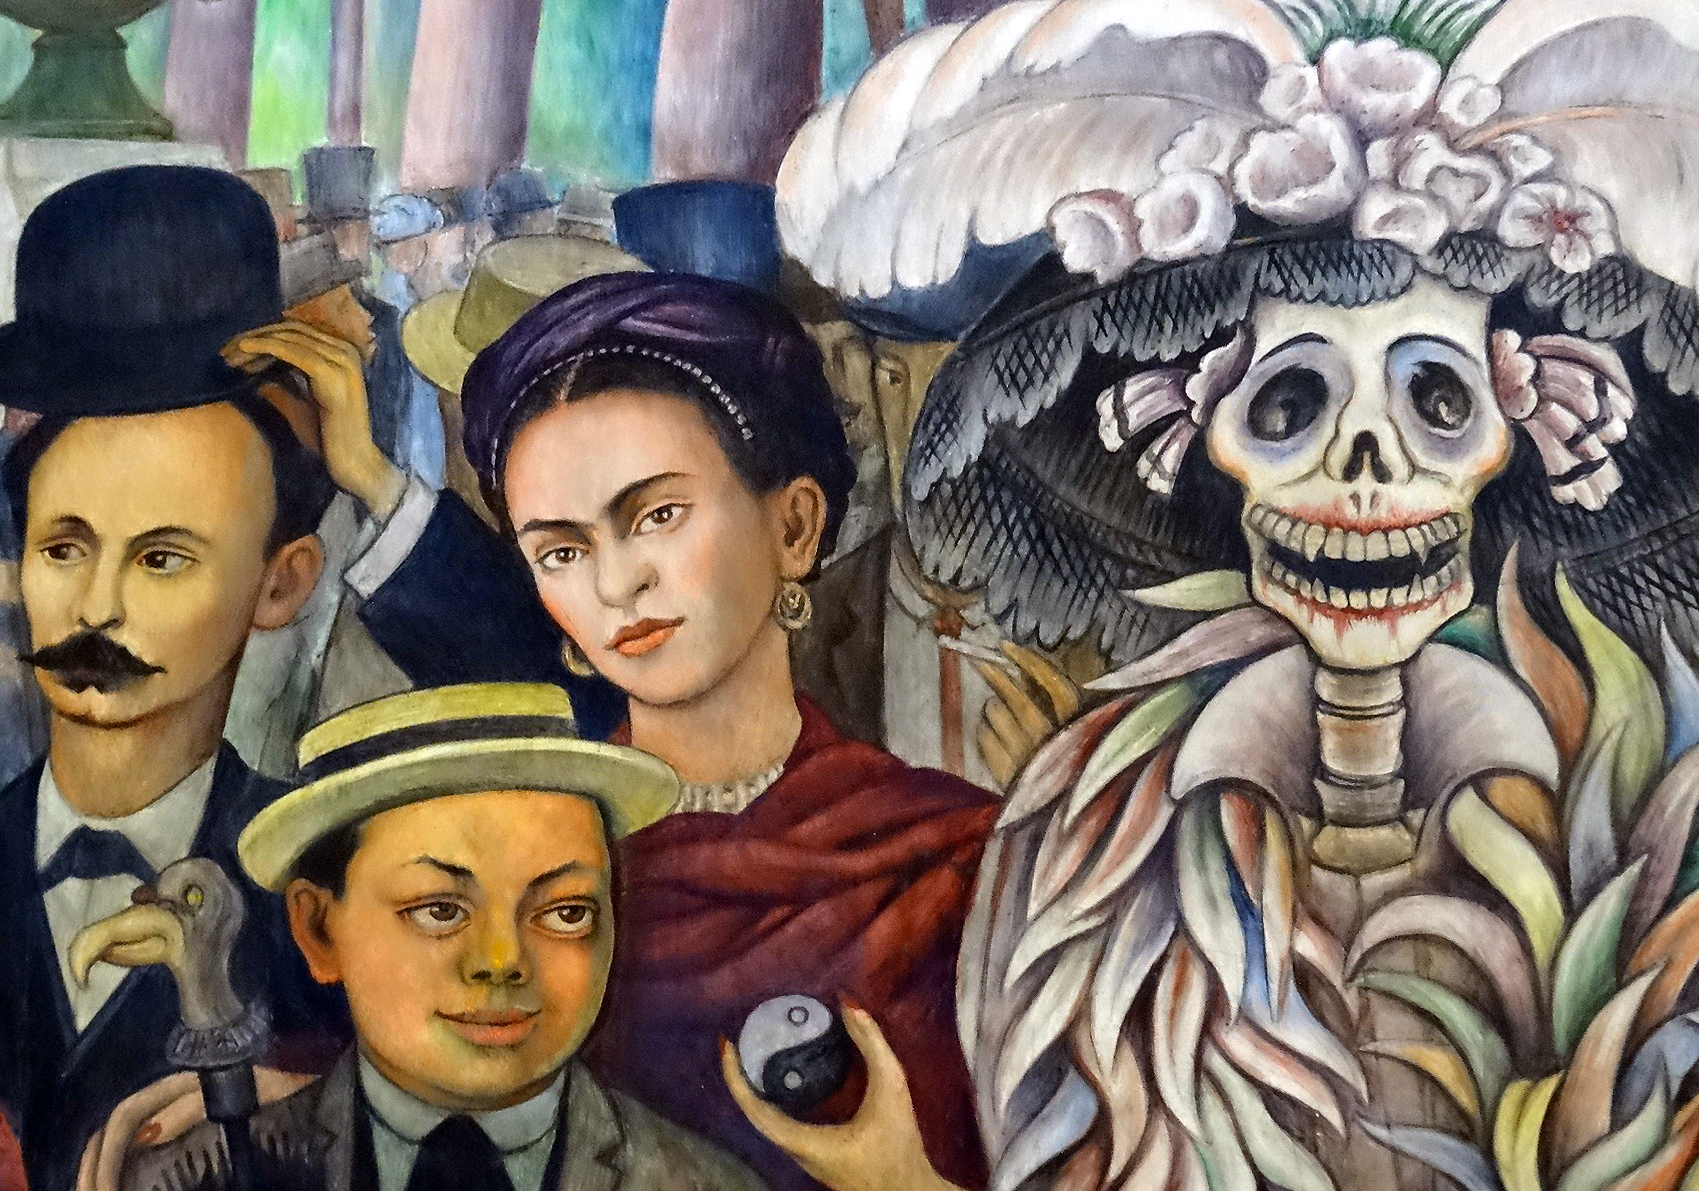 From Skulls to Frida Kahlo: Your Guide to Mexican Folk Art, Folk Art